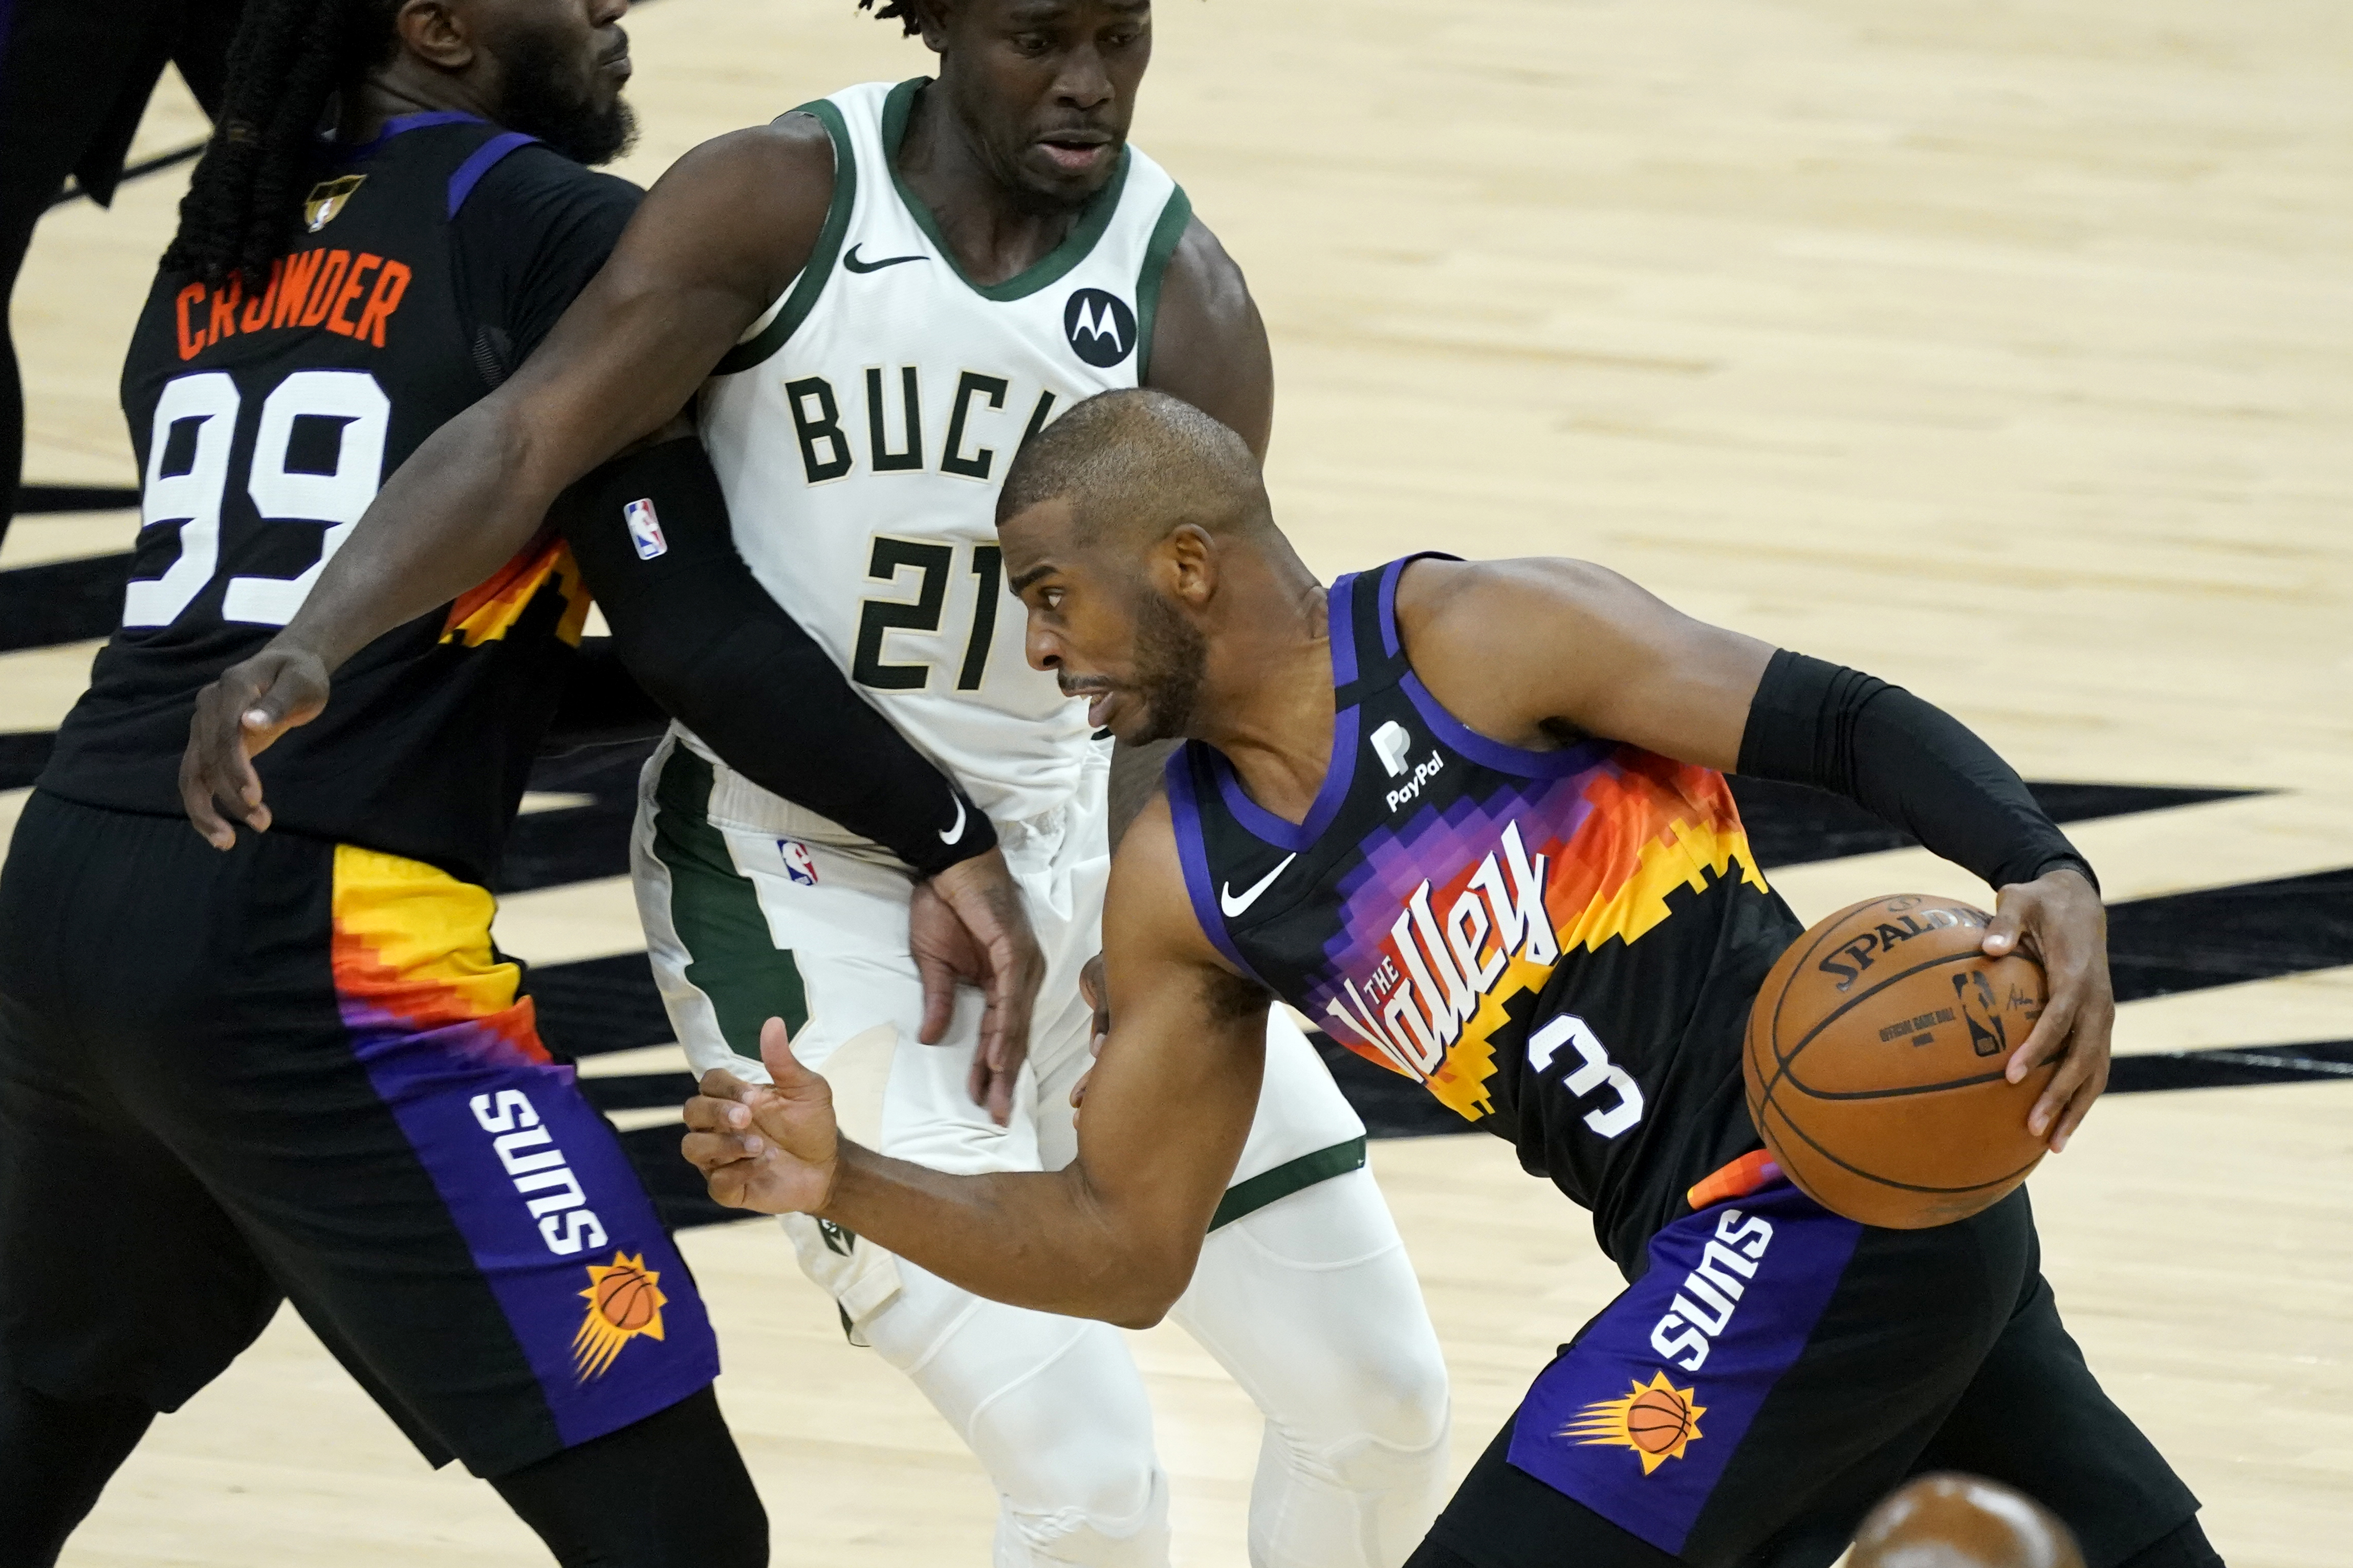 Giannis Antetokounmpo - Milwaukee Bucks - Game-Worn Earned Edition Jersey -  1st Half - Recorded a Double-Double - 2021 NBA Playoffs